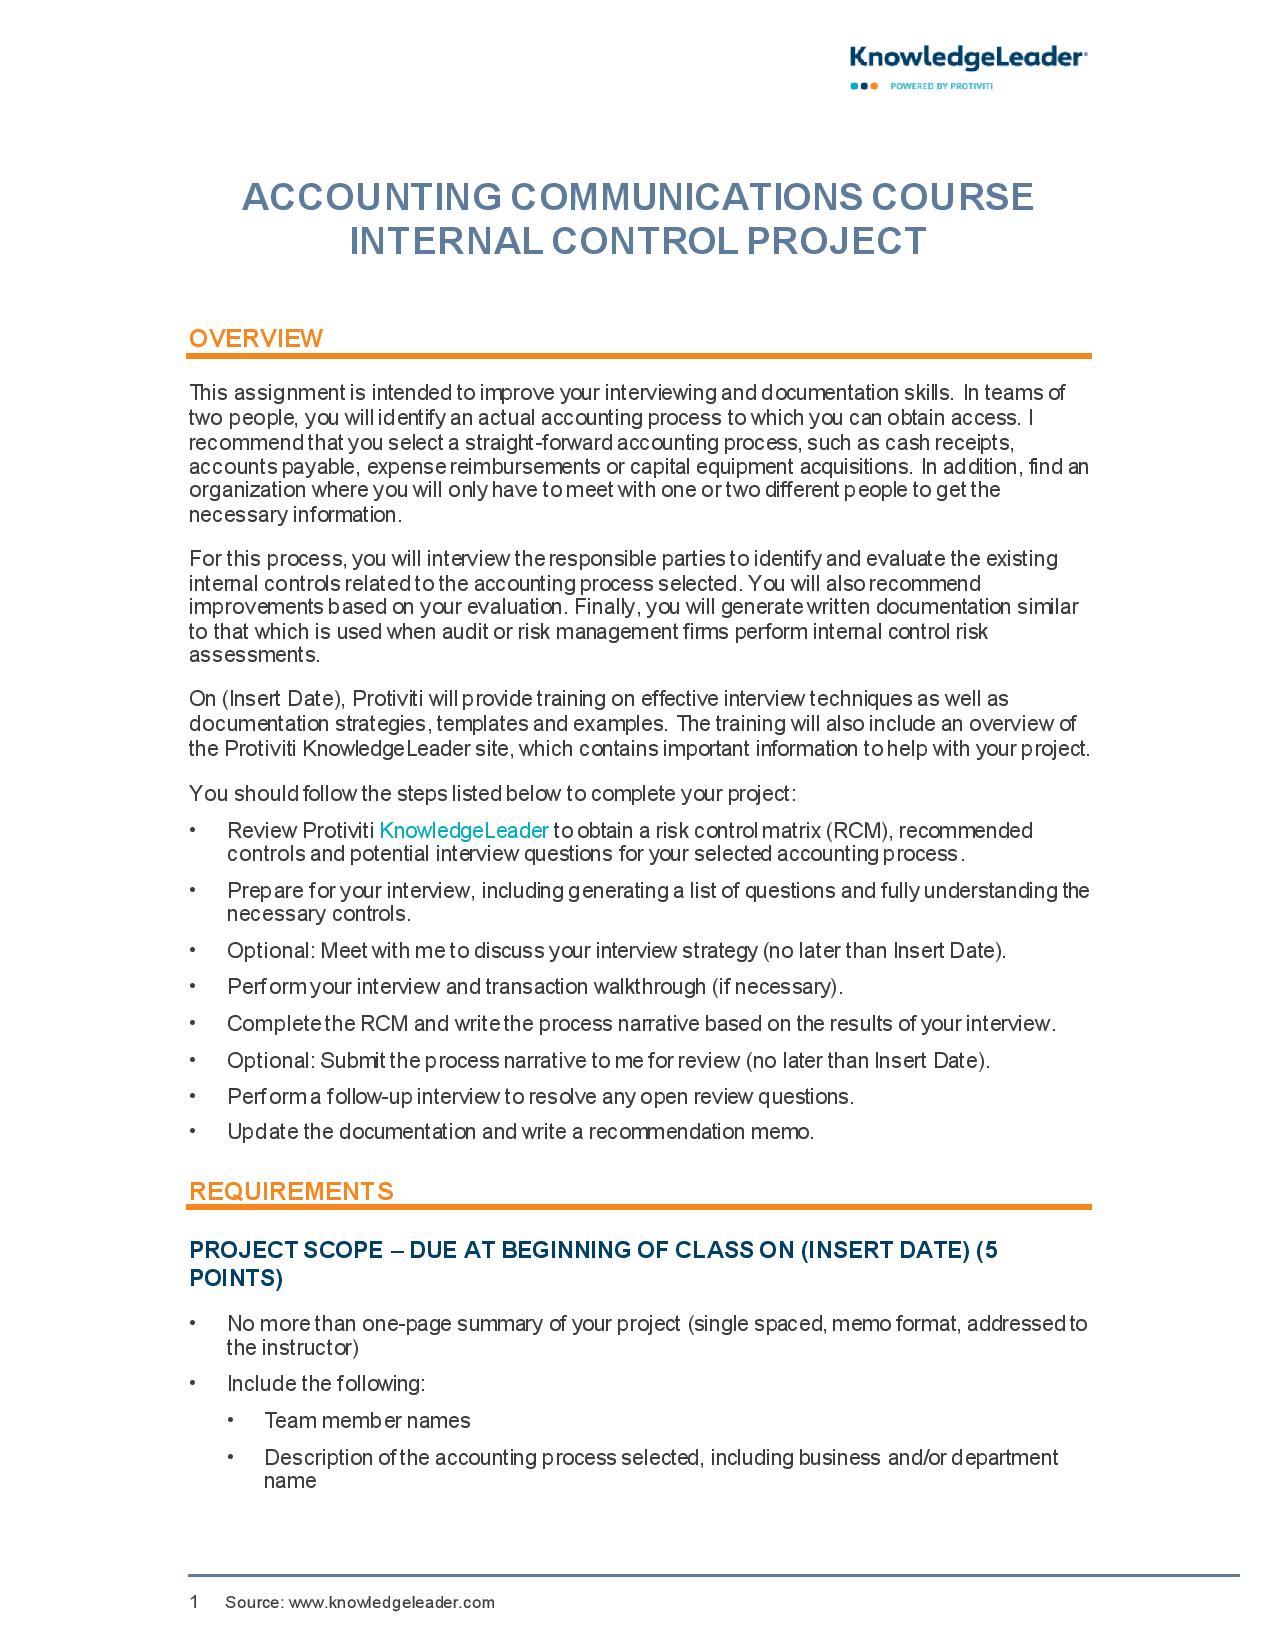 Screenshot of first page of ACCOUNTING COMMUNICATIONS COURSE INTERNAL CONTROL PROJECT